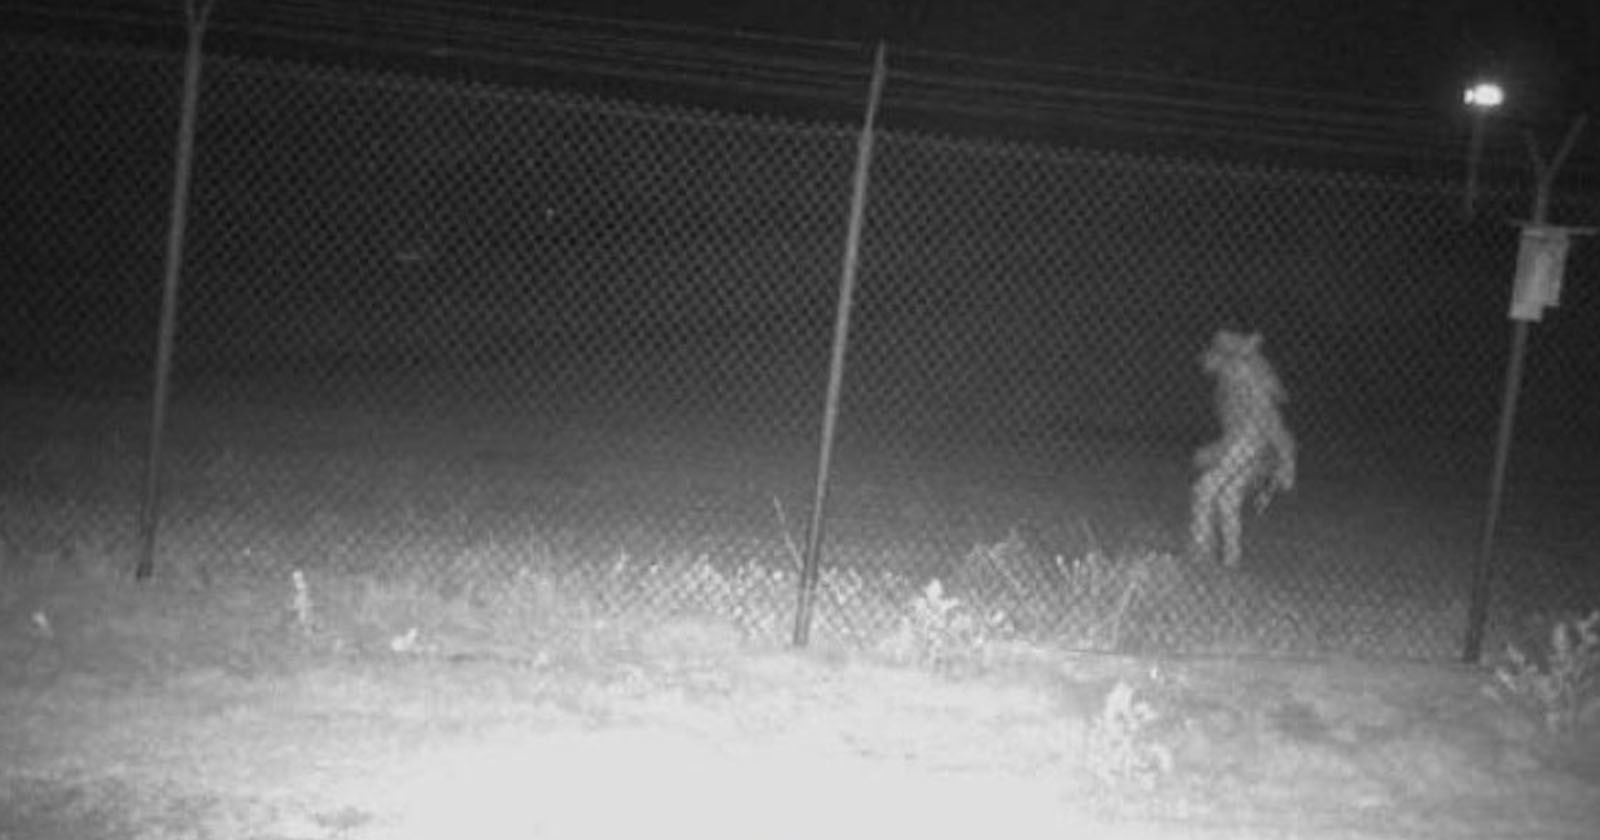 City Asks Public to Help Identify Mysterious Creature Caught on Camera